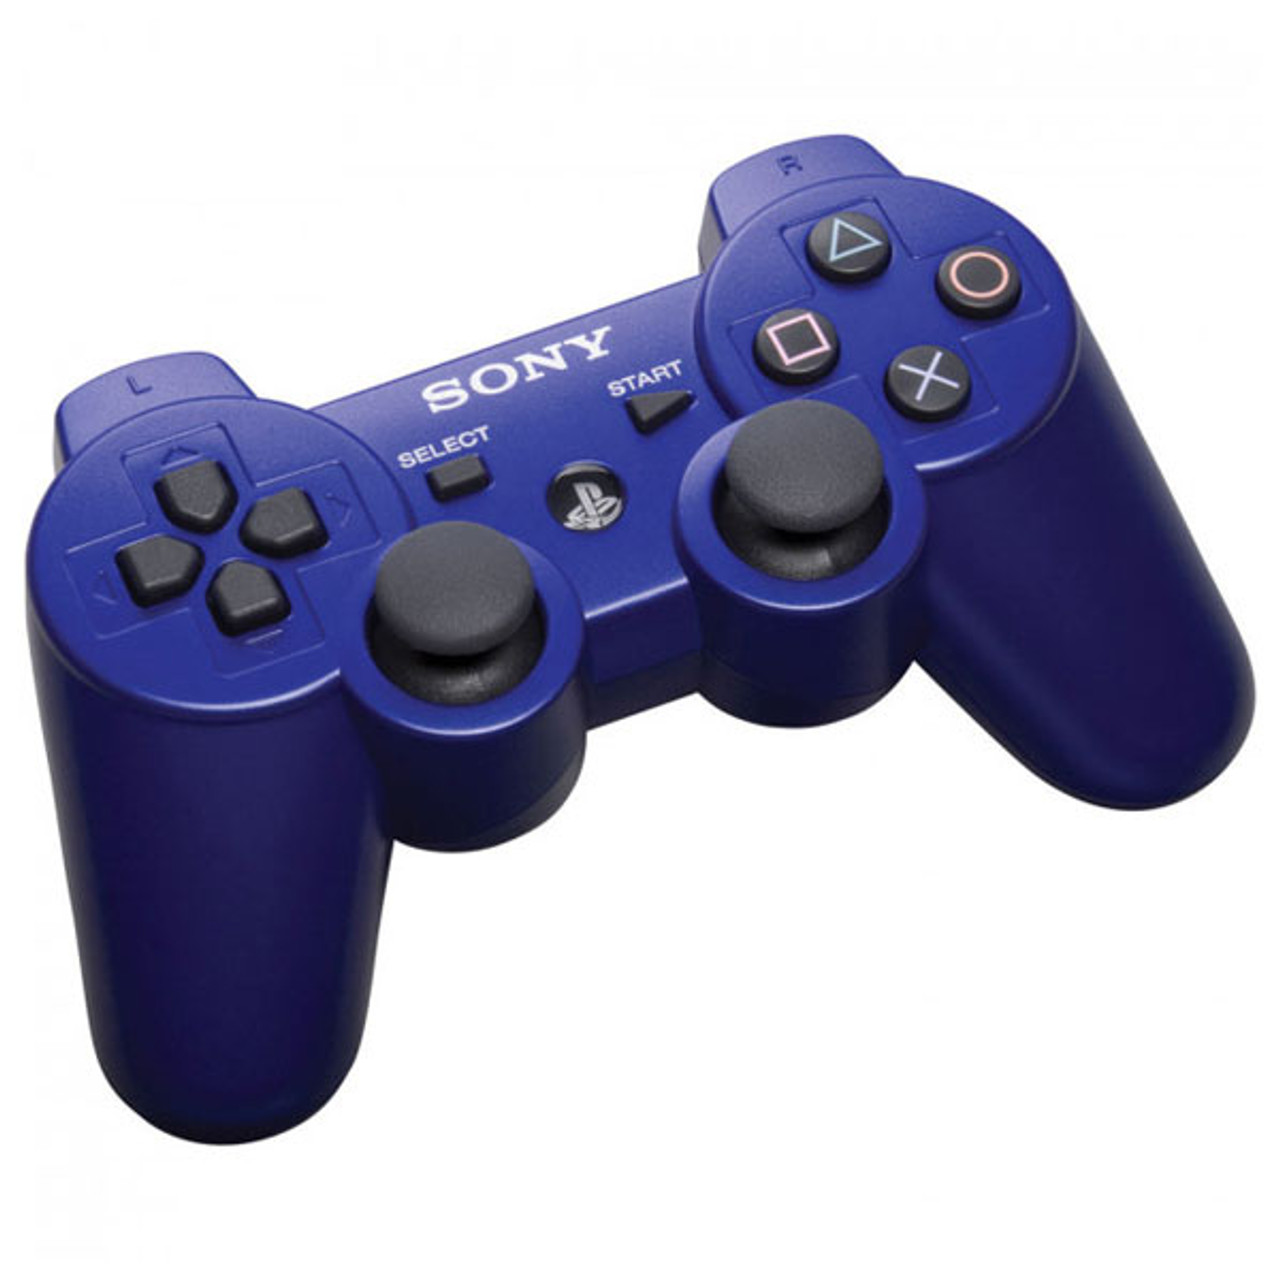 Original PlayStation 3 Wireless Controller - Color Sale DKOldies